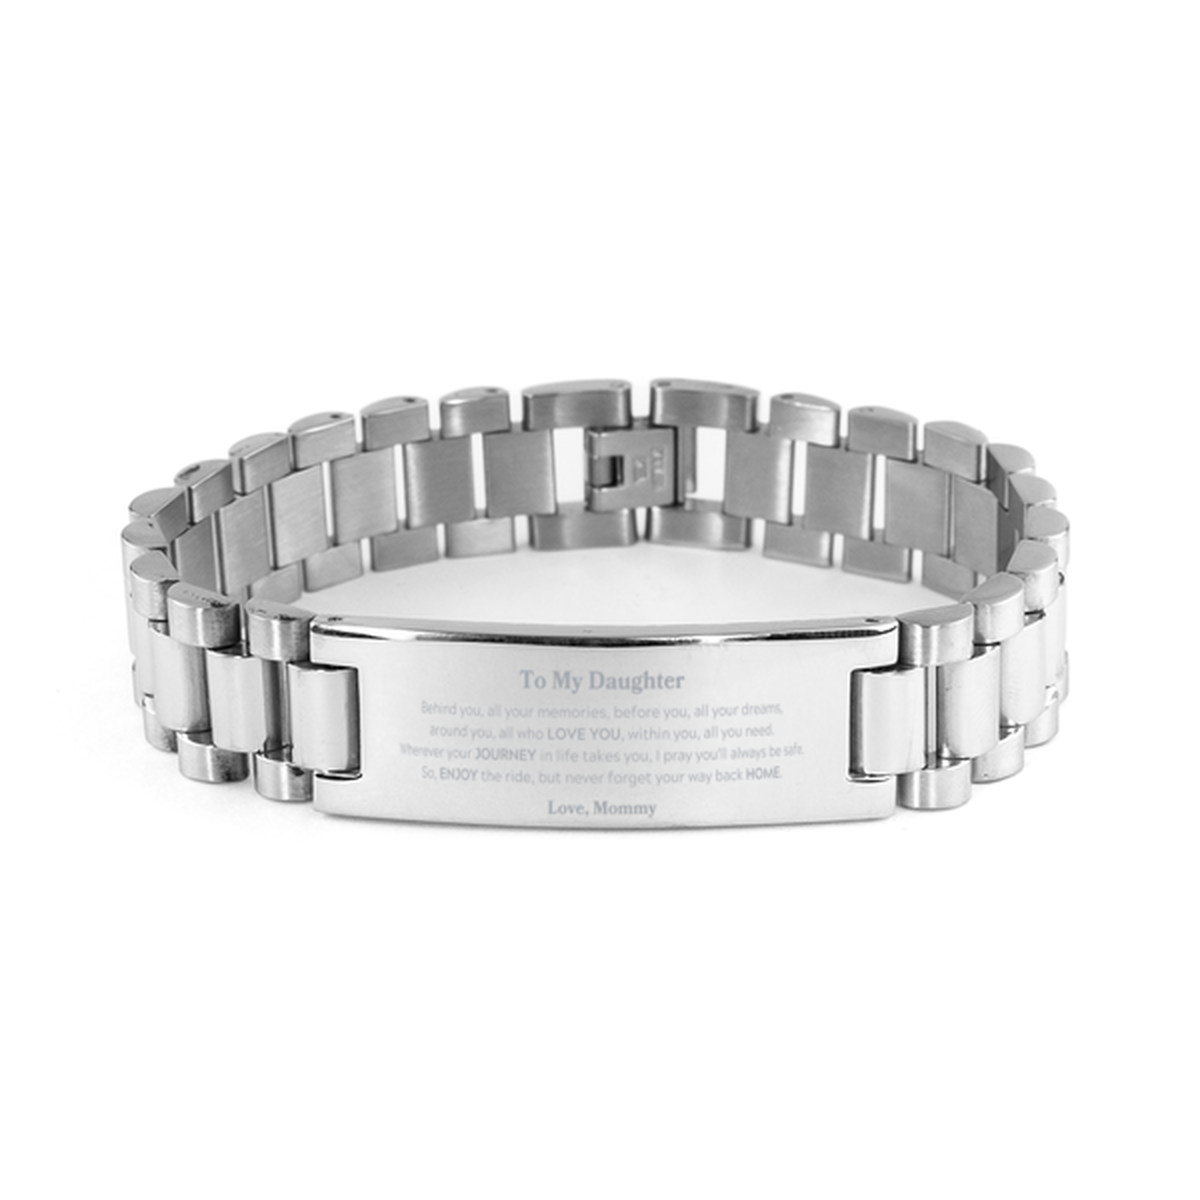 To My Daughter Graduation Gifts from Mommy, Daughter Ladder Stainless Steel Bracelet Christmas Birthday Gifts for Daughter Behind you, all your memories, before you, all your dreams. Love, Mommy